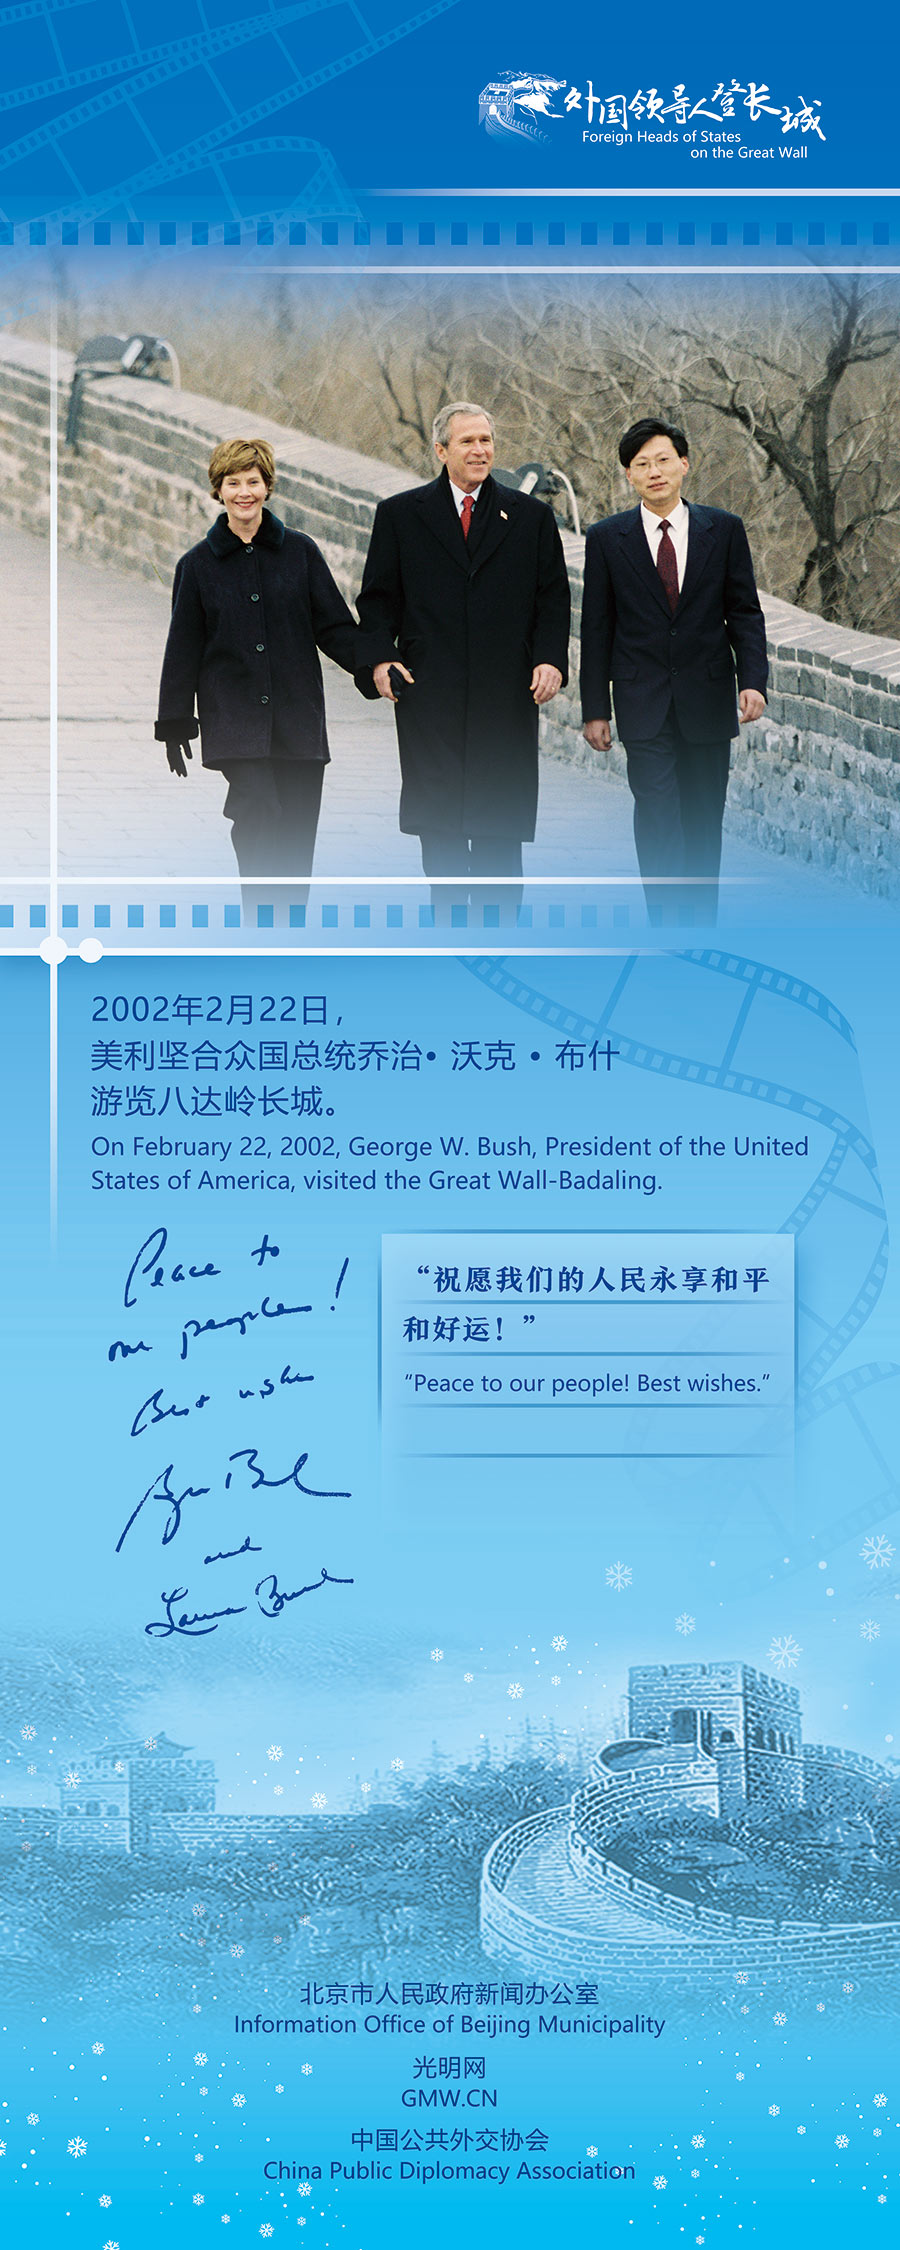 Bush: Singing the Song of Peace on the Great Wall